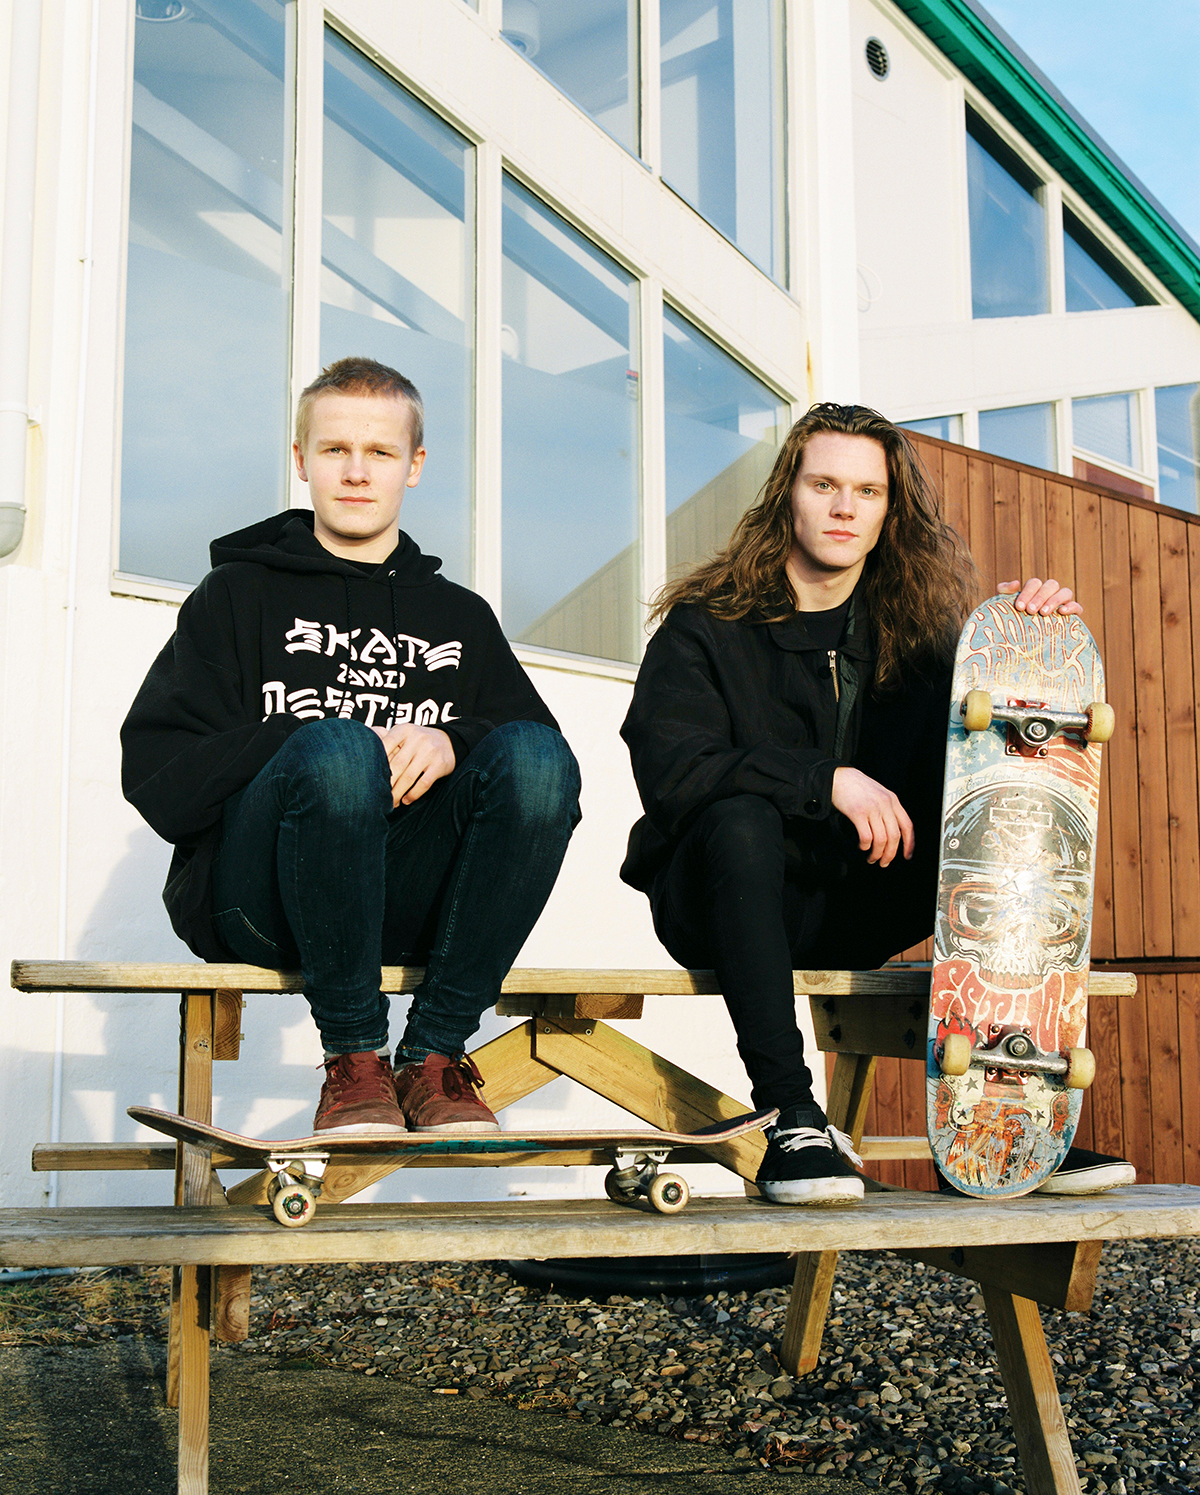  I met Stefán and Bjartur in Neskaupstaður when I saw them skateboarding outside of the gas station. “There aren’t many people who skateboard here, so we got into it to make things happen for ourselves,” they said. They both work on pushing their lim